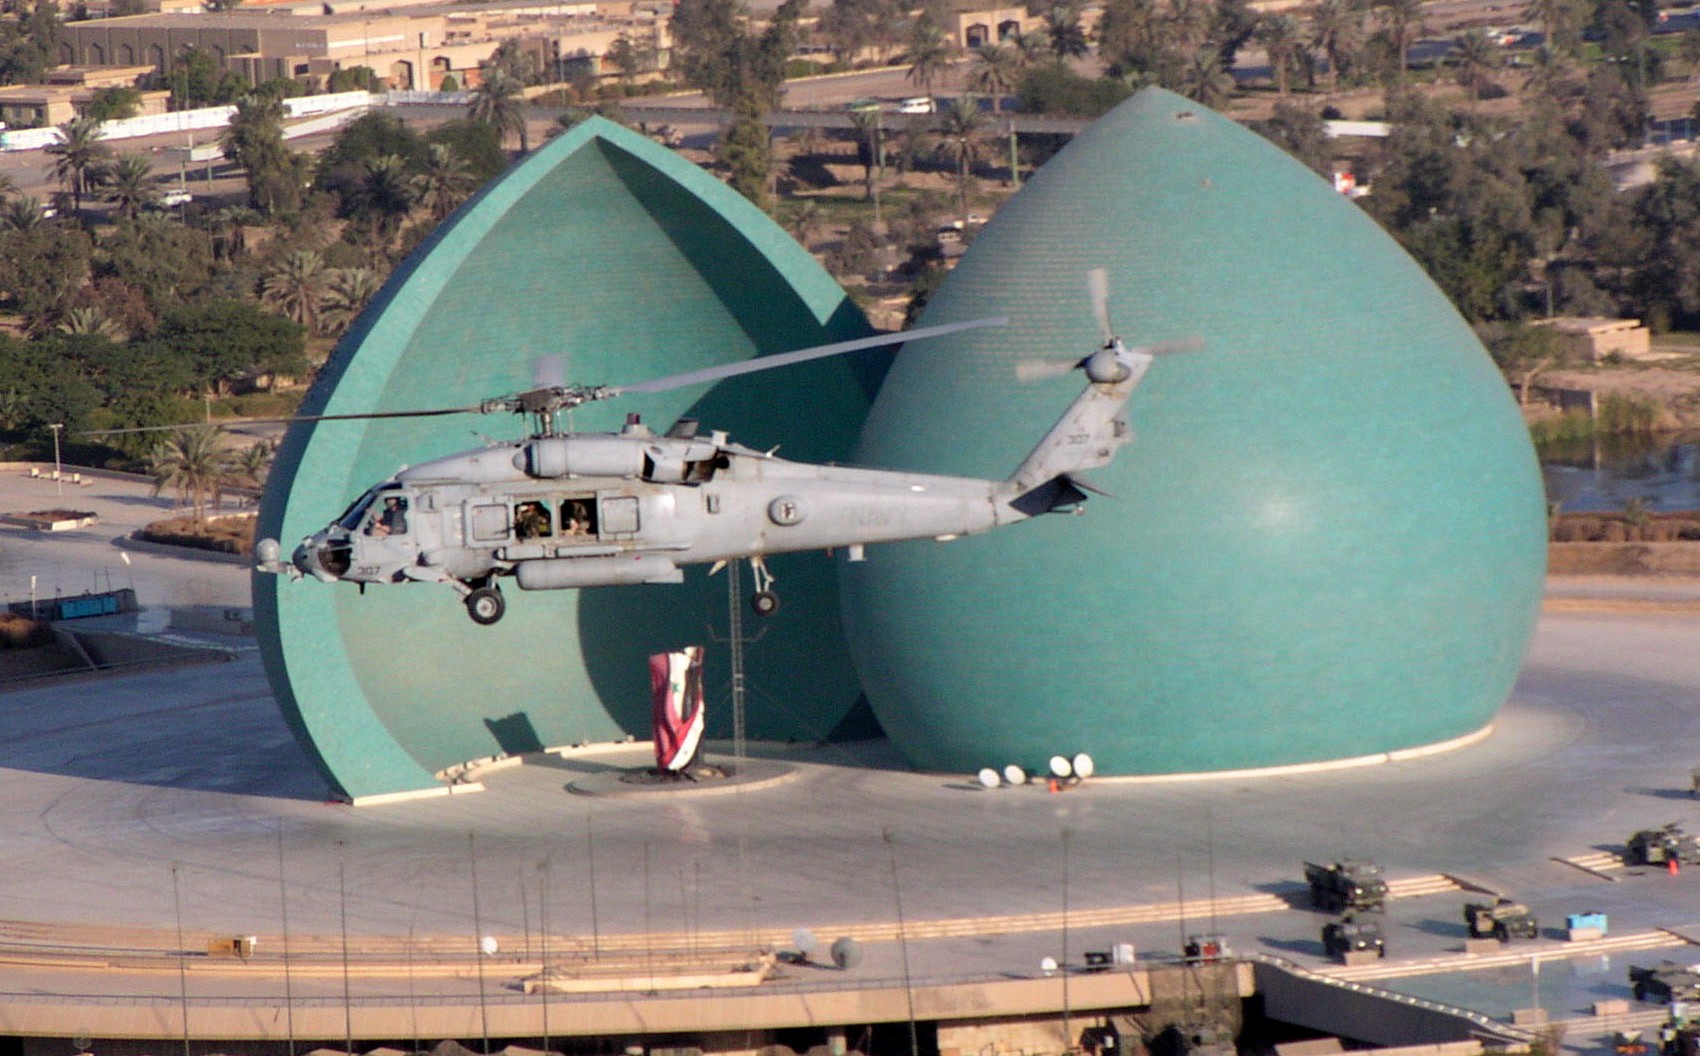 hcs-5 firehawks helicopter combat support special squadron hh-60h seahawk 03 baghdad